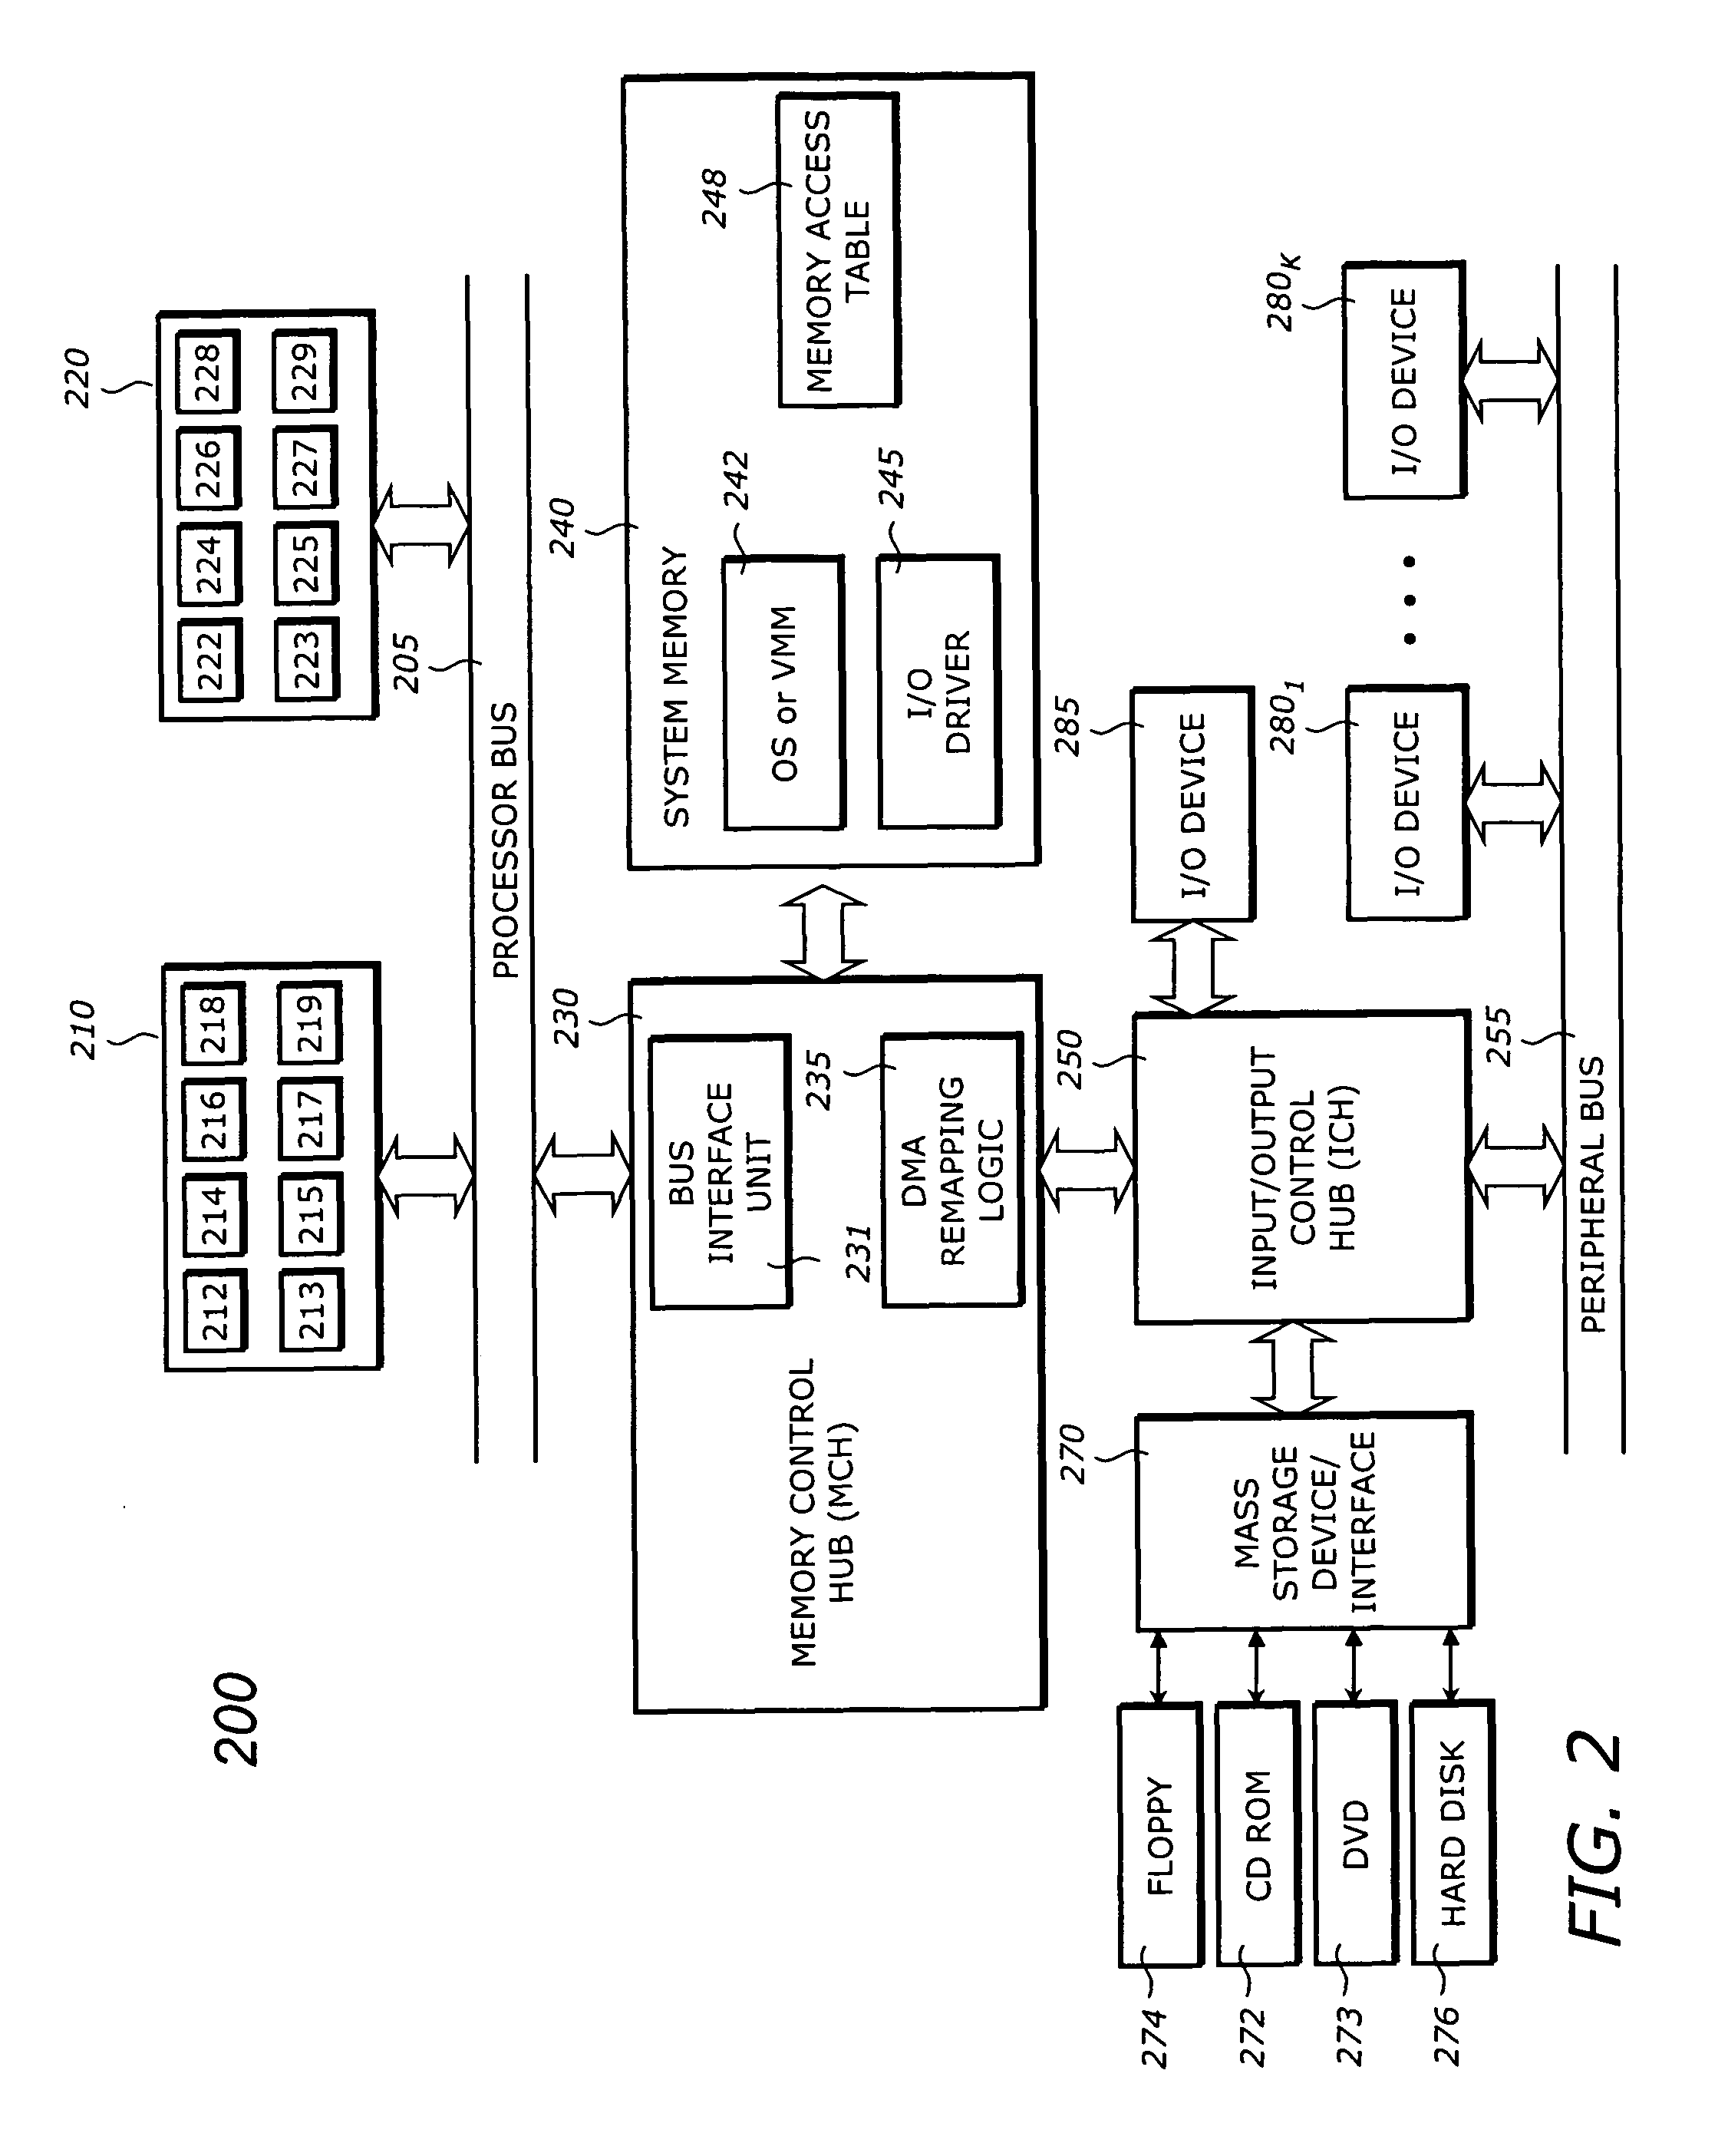 Performing direct cache access transactions based on a memory access data structure